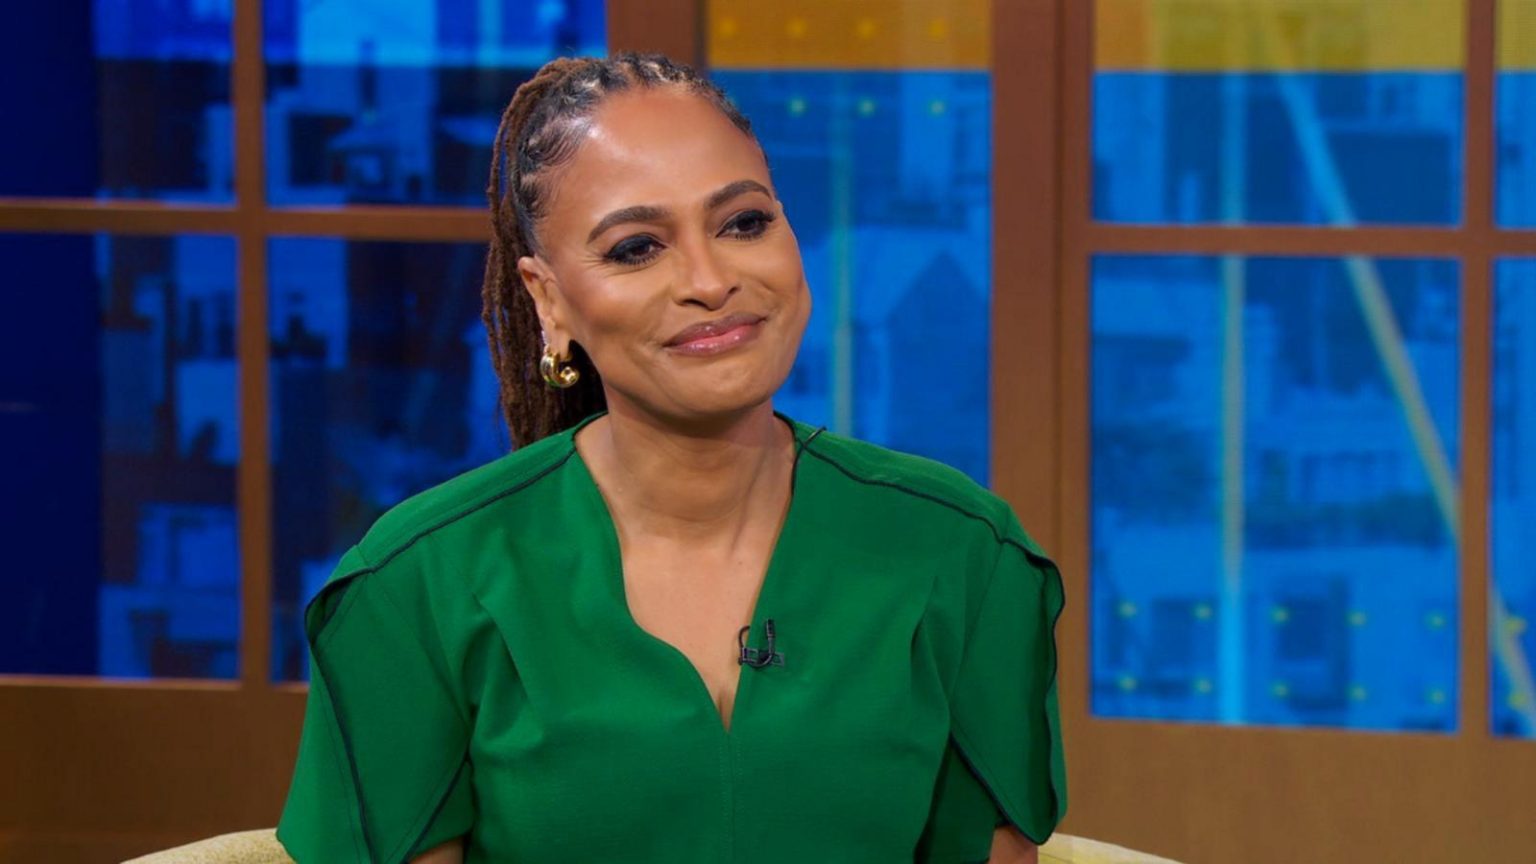 What Are Some Interesting Facts About Ava DuVernay? - ABTC